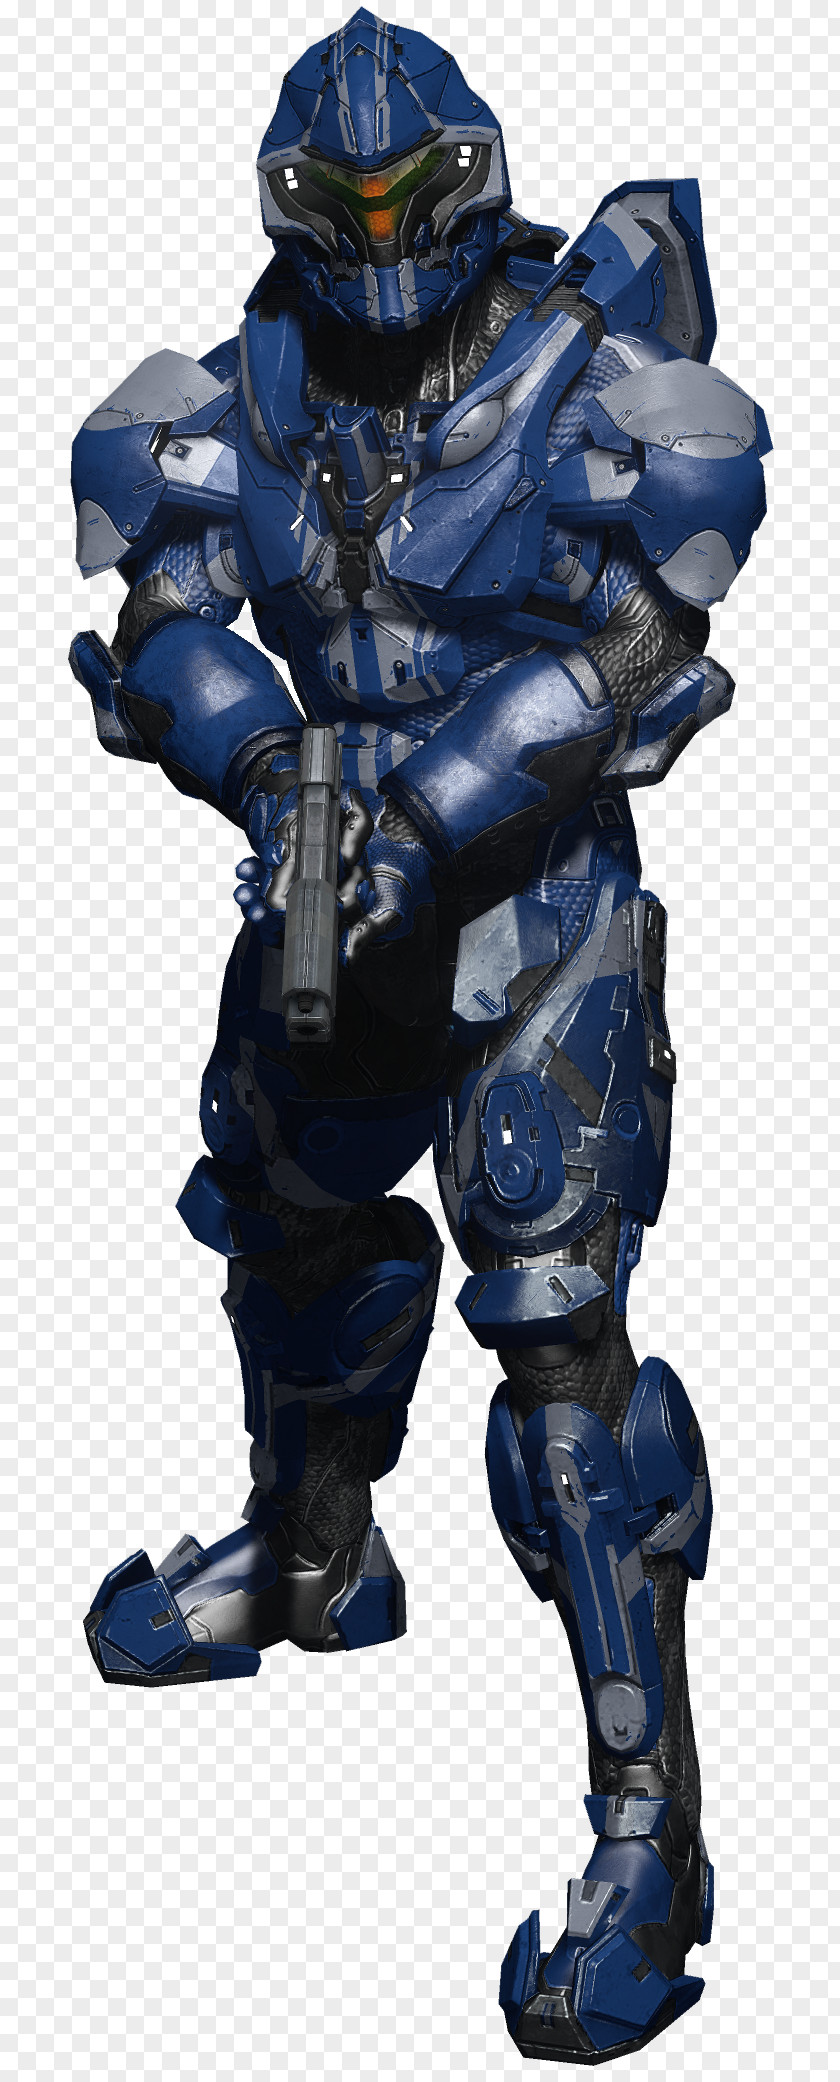 Halo 4 5: Guardians Pathfinder Roleplaying Game Master Chief Wars 2 PNG